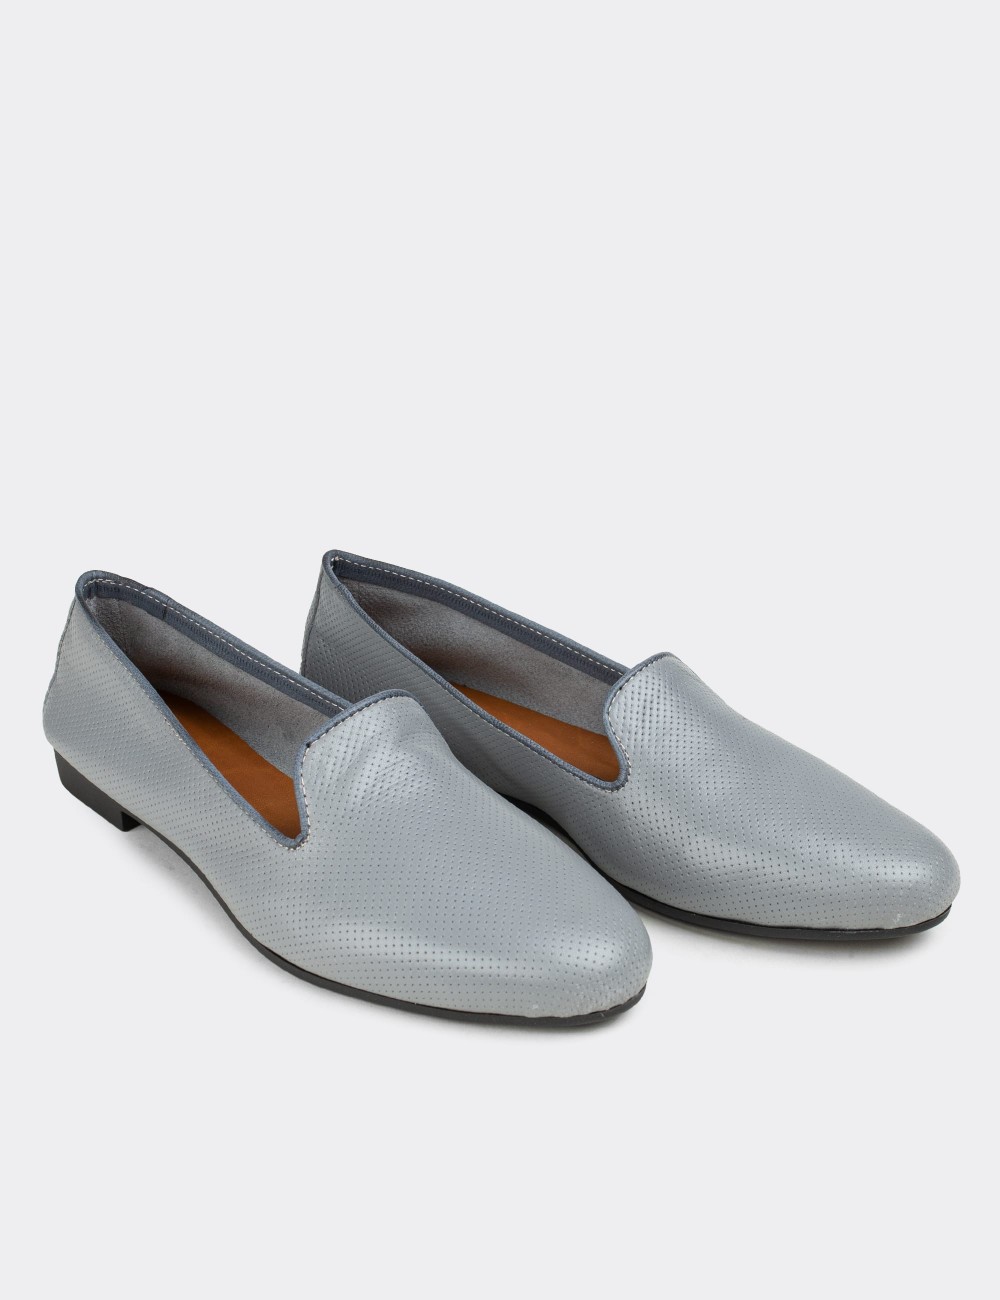 Gray  Leather Loafers  - E3208ZGRIC03